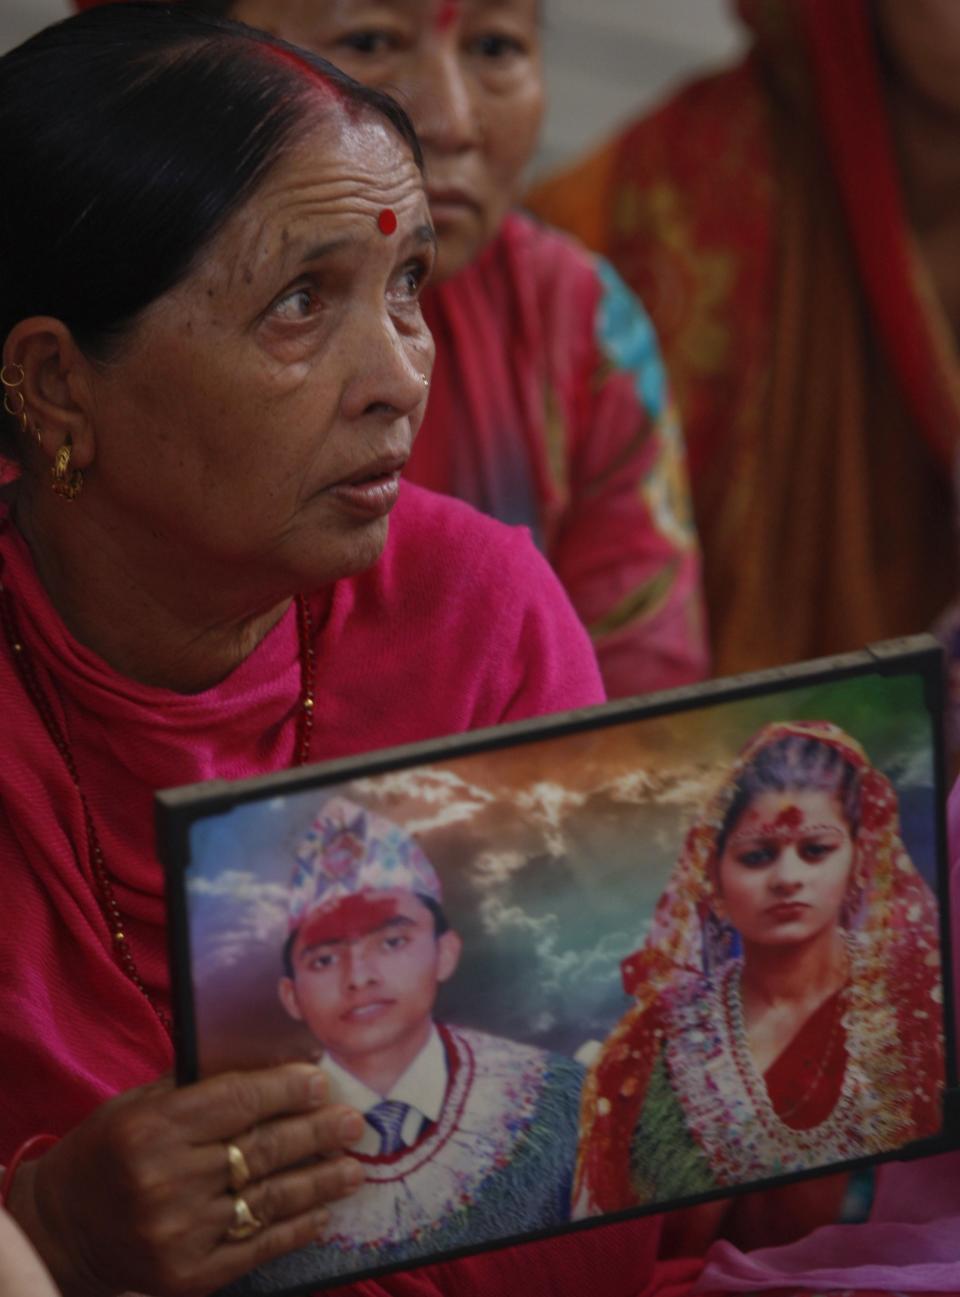 Indian woman Padma holds a photograph showing her son Bharat and daughter in law Partima with whom she has not been able to establish contact after Saturday's earthquake in Nepal, during a prayer ceremony for the earthquake affected at a Hindu temple in Jammu, India, Monday, April 27, 2015.  (AP Photo/Channi Anand)